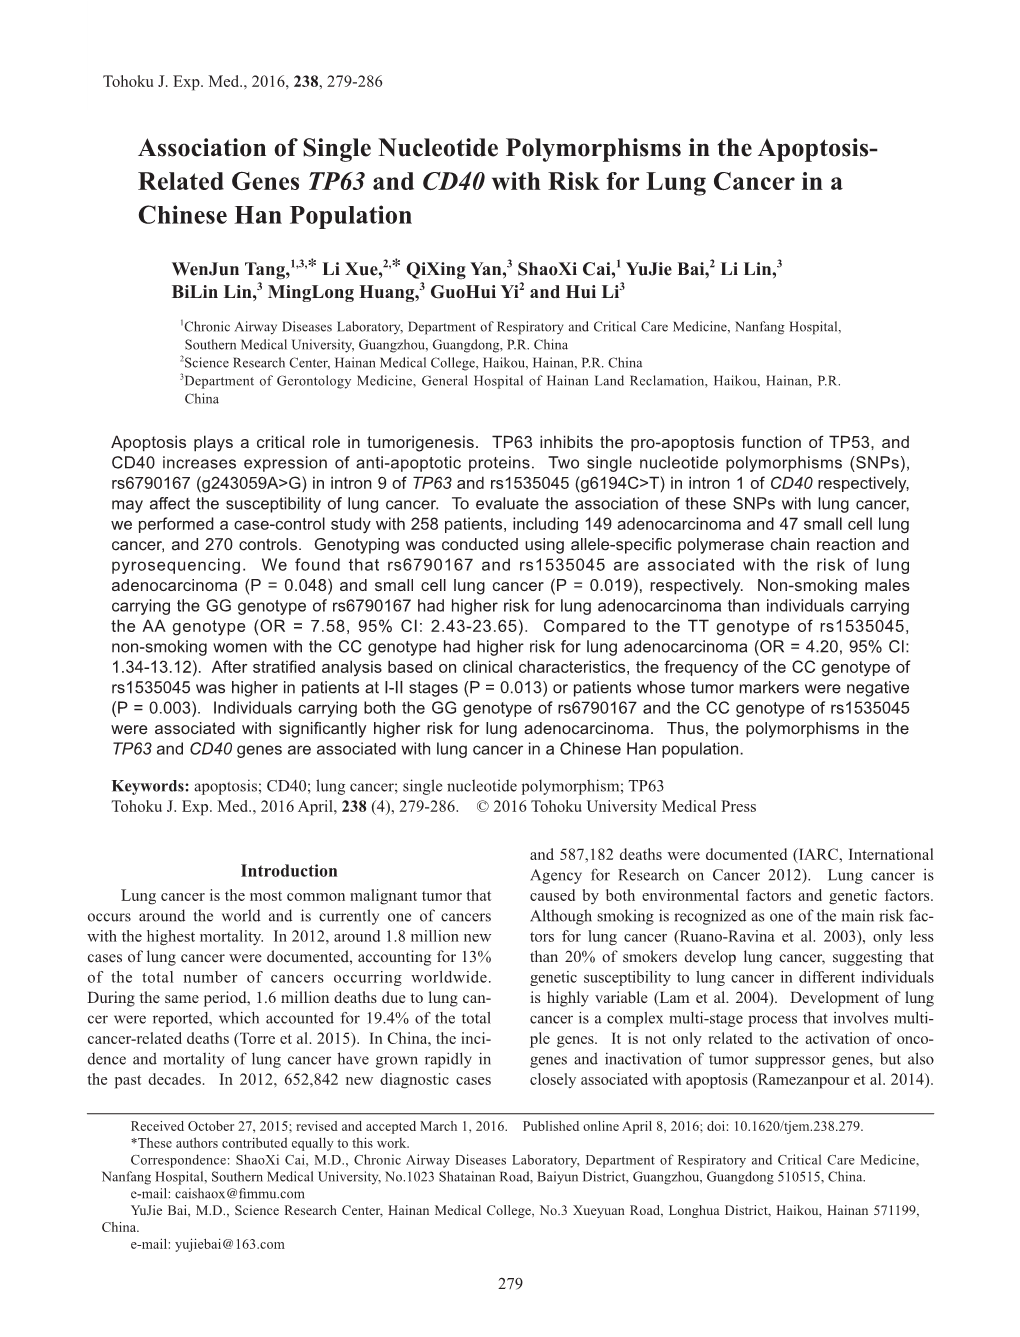 Association of Single Nucleotide Polymorphisms in the Apoptosis- Related Genes TP63 and CD40 with Risk for Lung Cancer in a Chinese Han Population